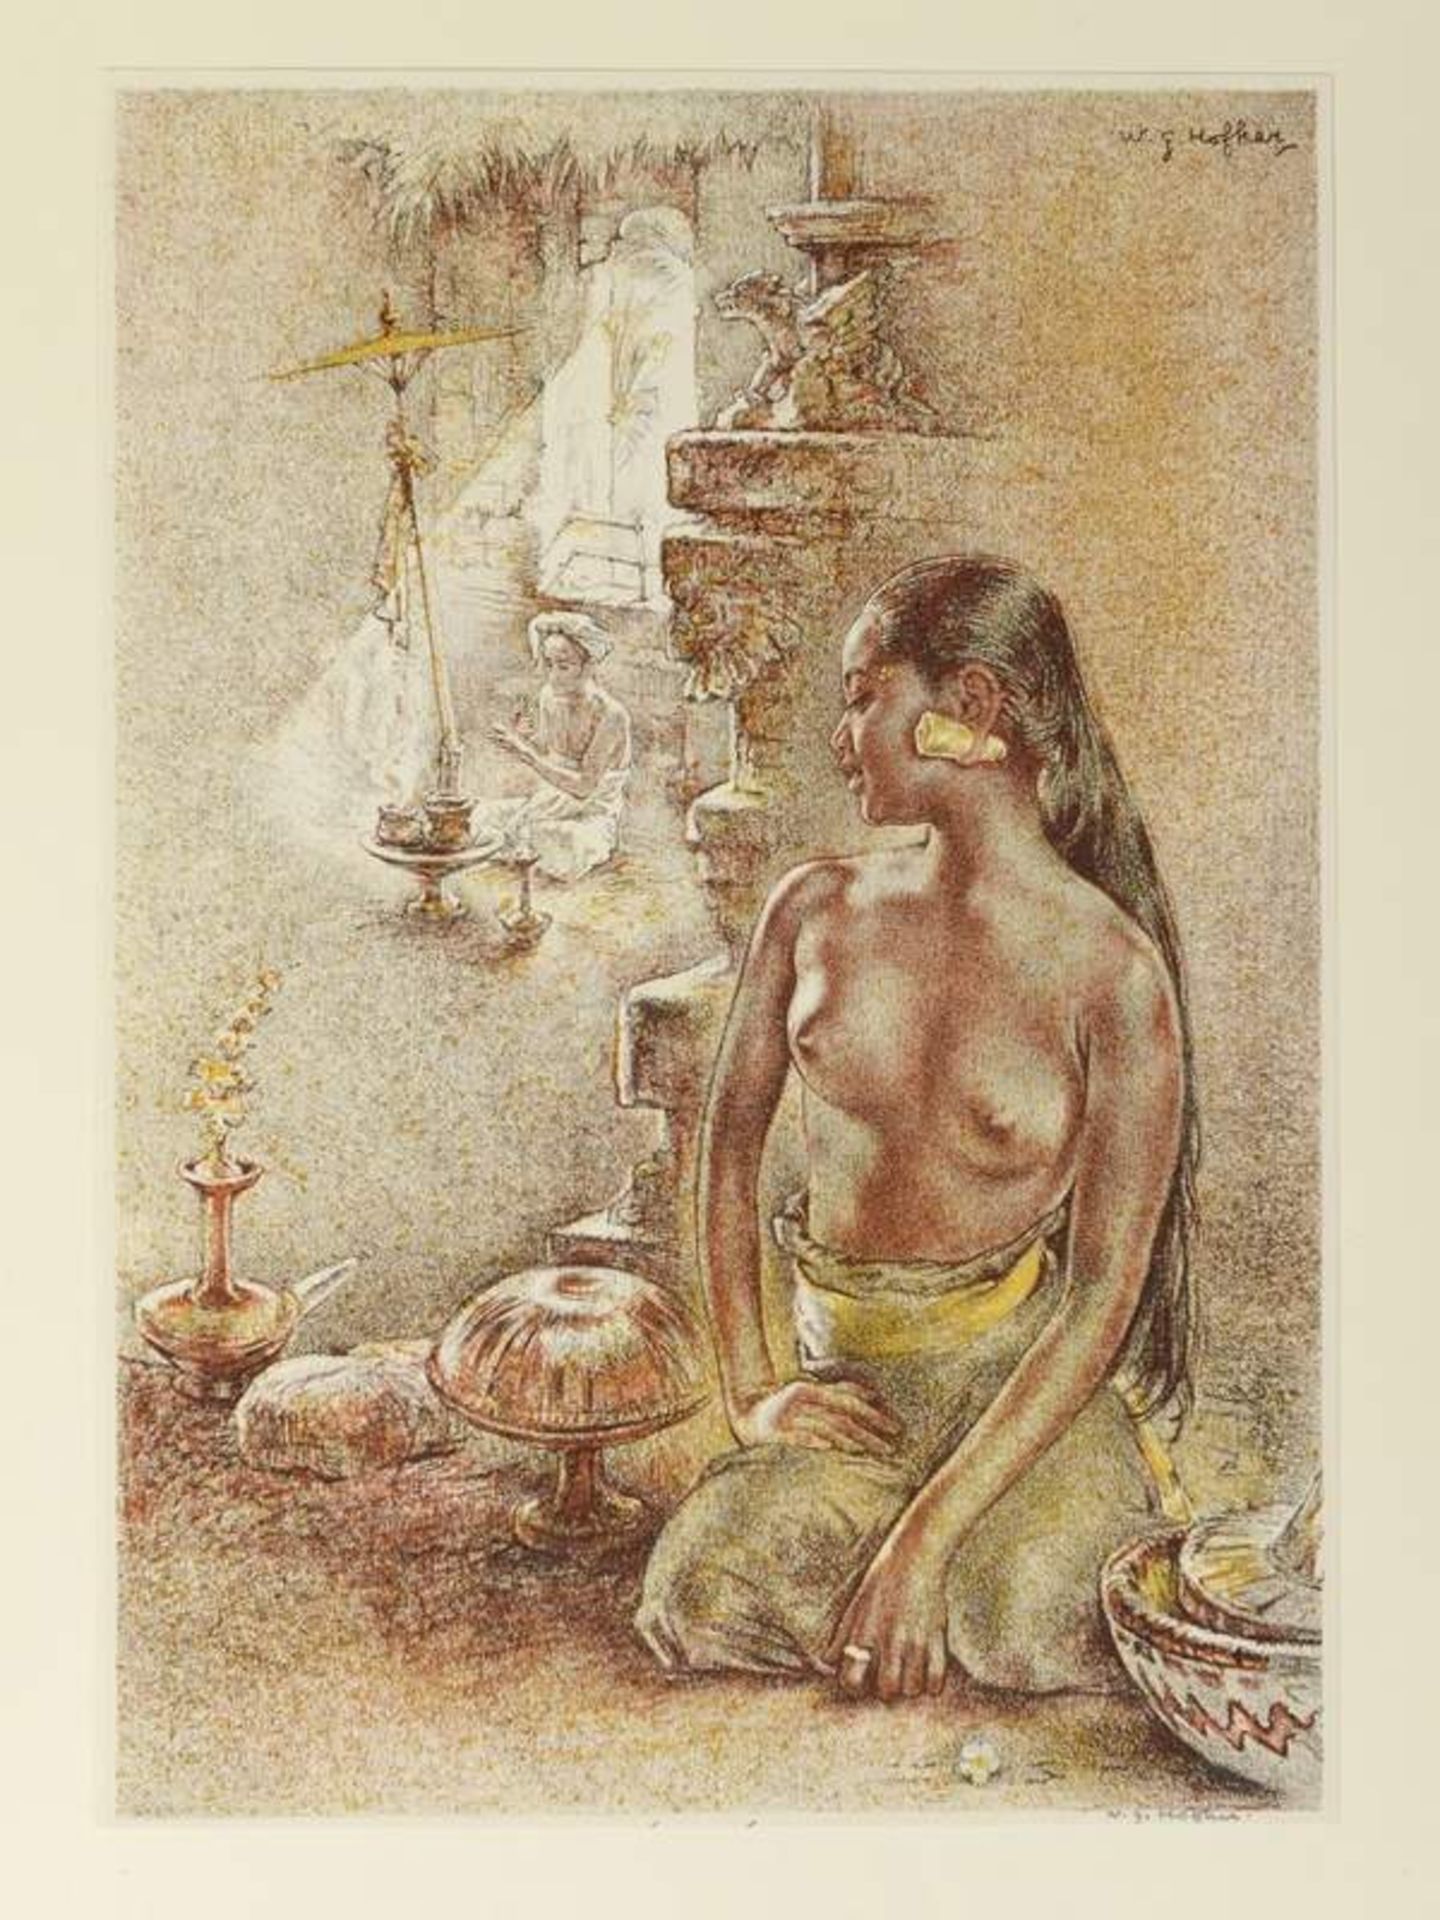 Willem Gerard Hofker (1902-1981), 'Ni Asoeg', hand signed lower right, lithograph, 33 x 23 cm.